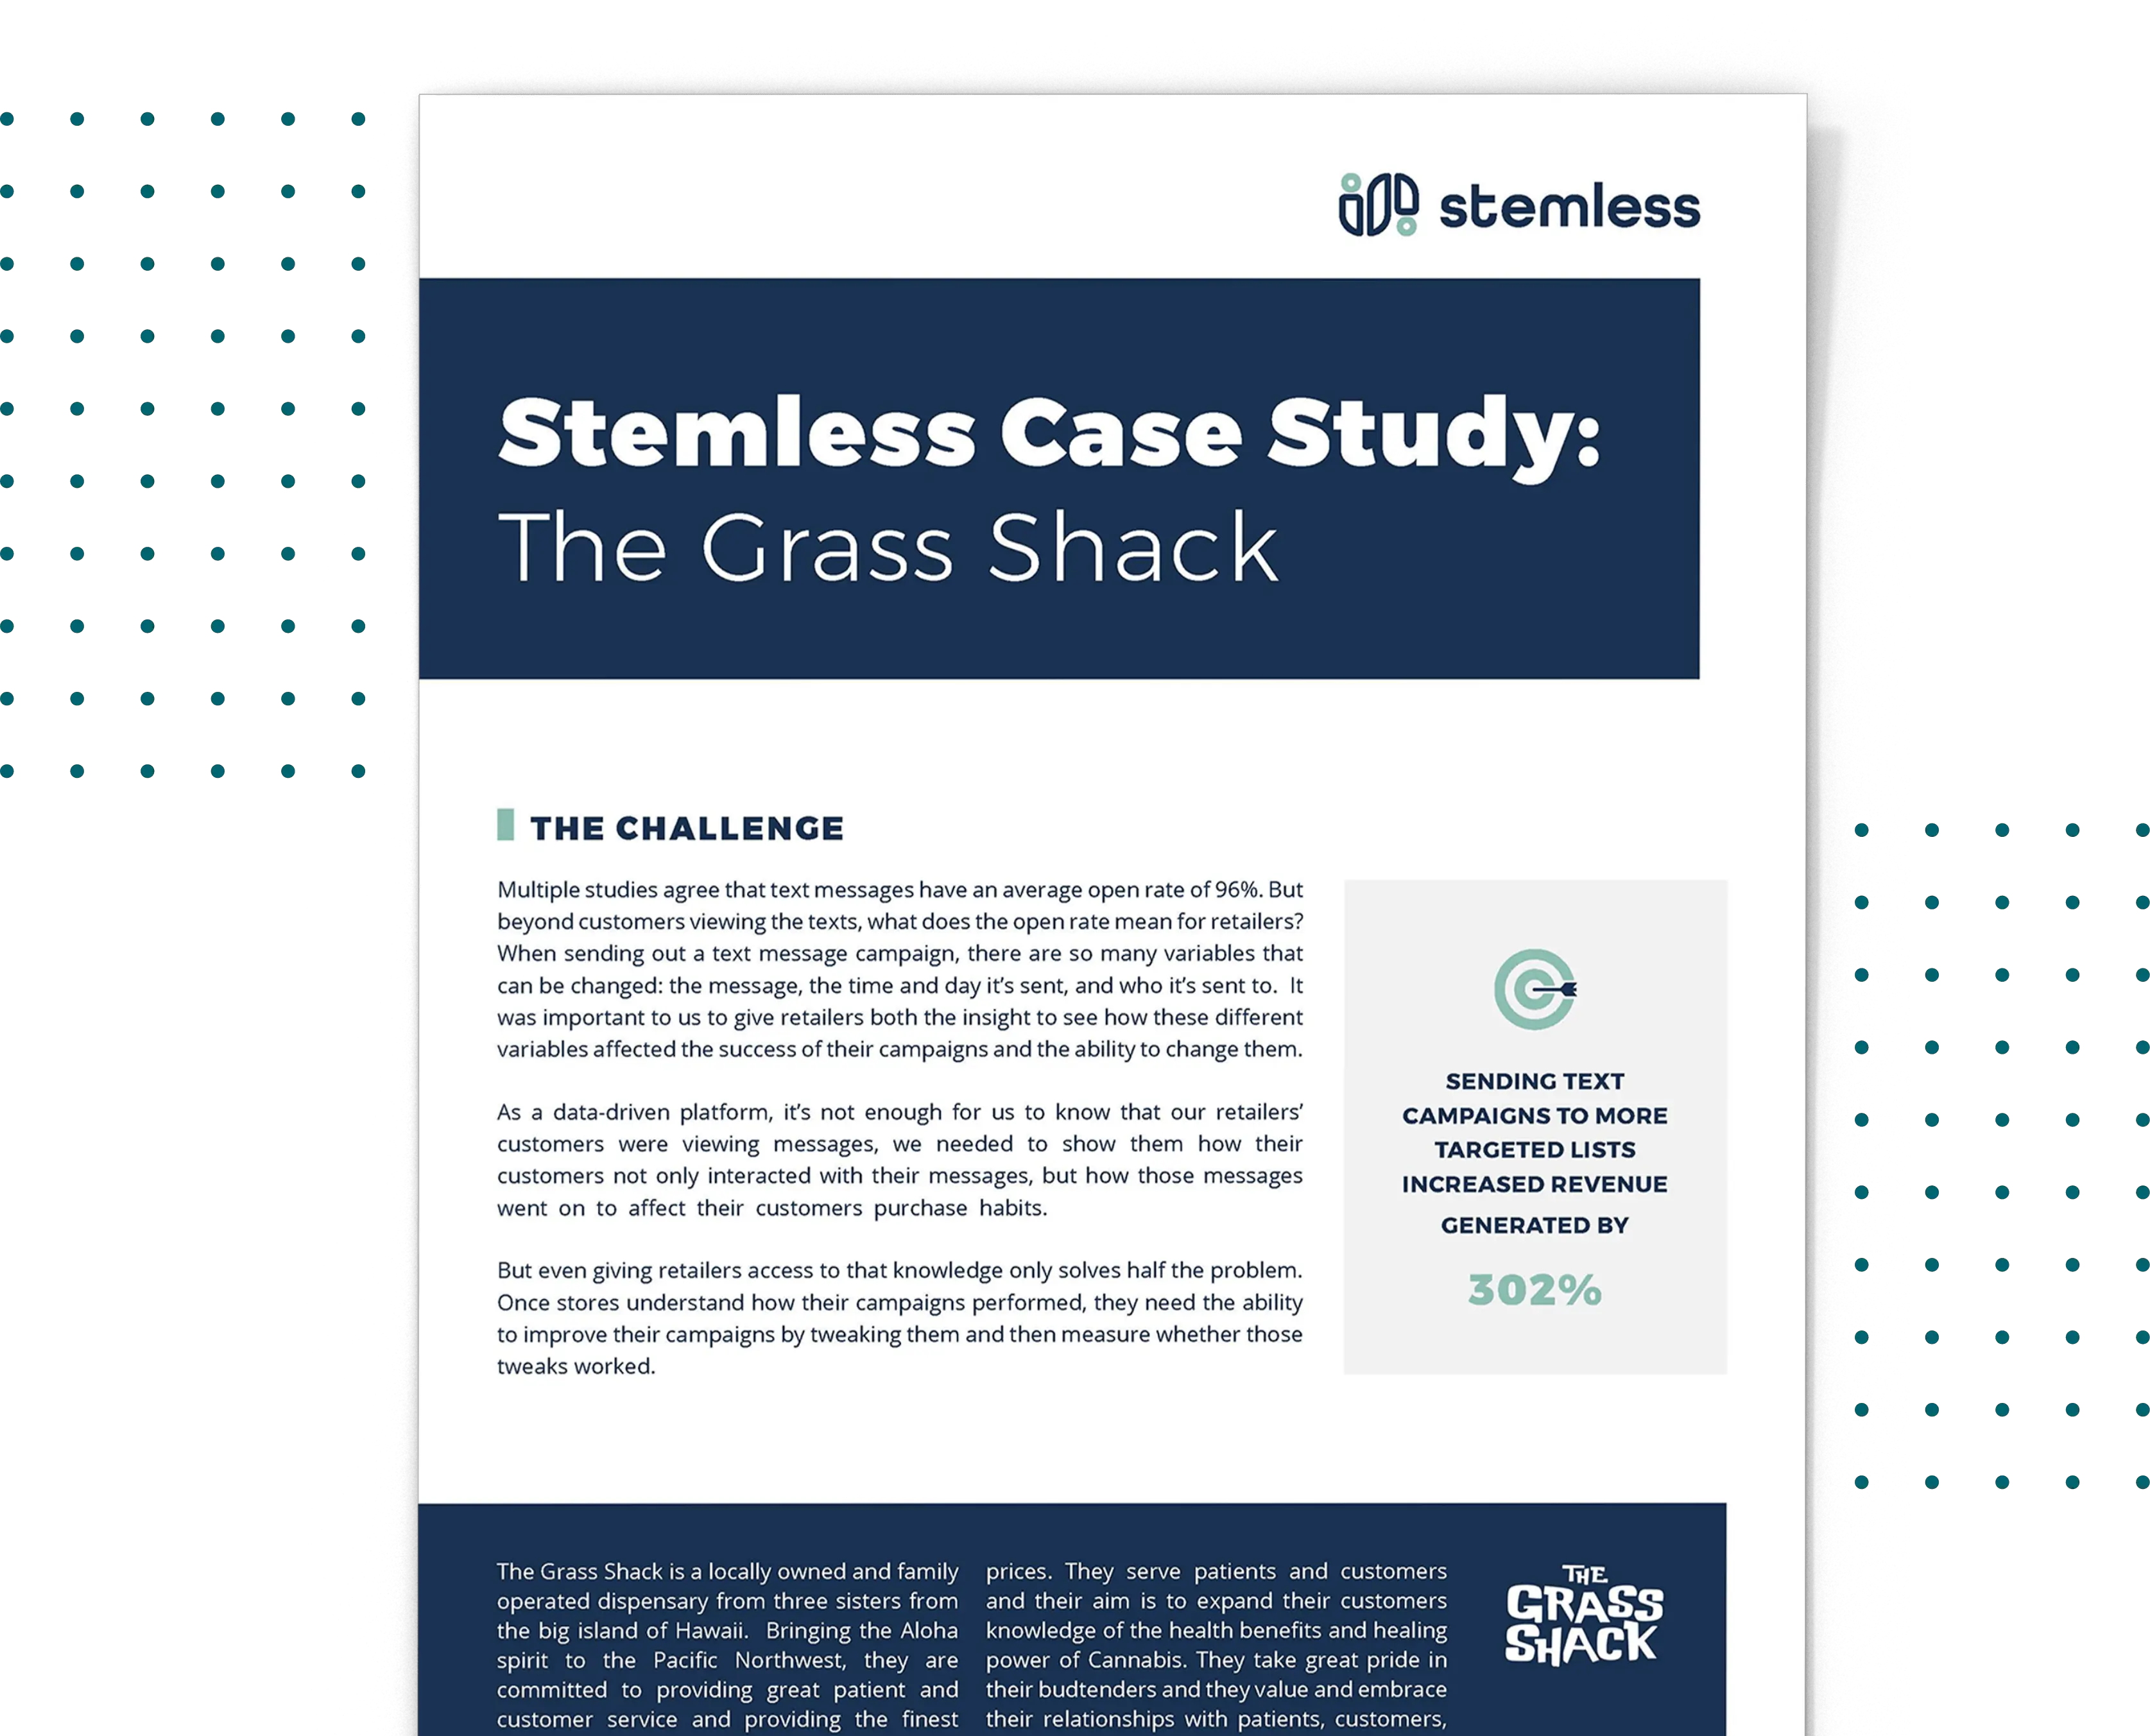 Successful marketing campaigns don’t just happen. Grass Shack case study shows that market segmentation theory speaks for itself with sms text messaging platform